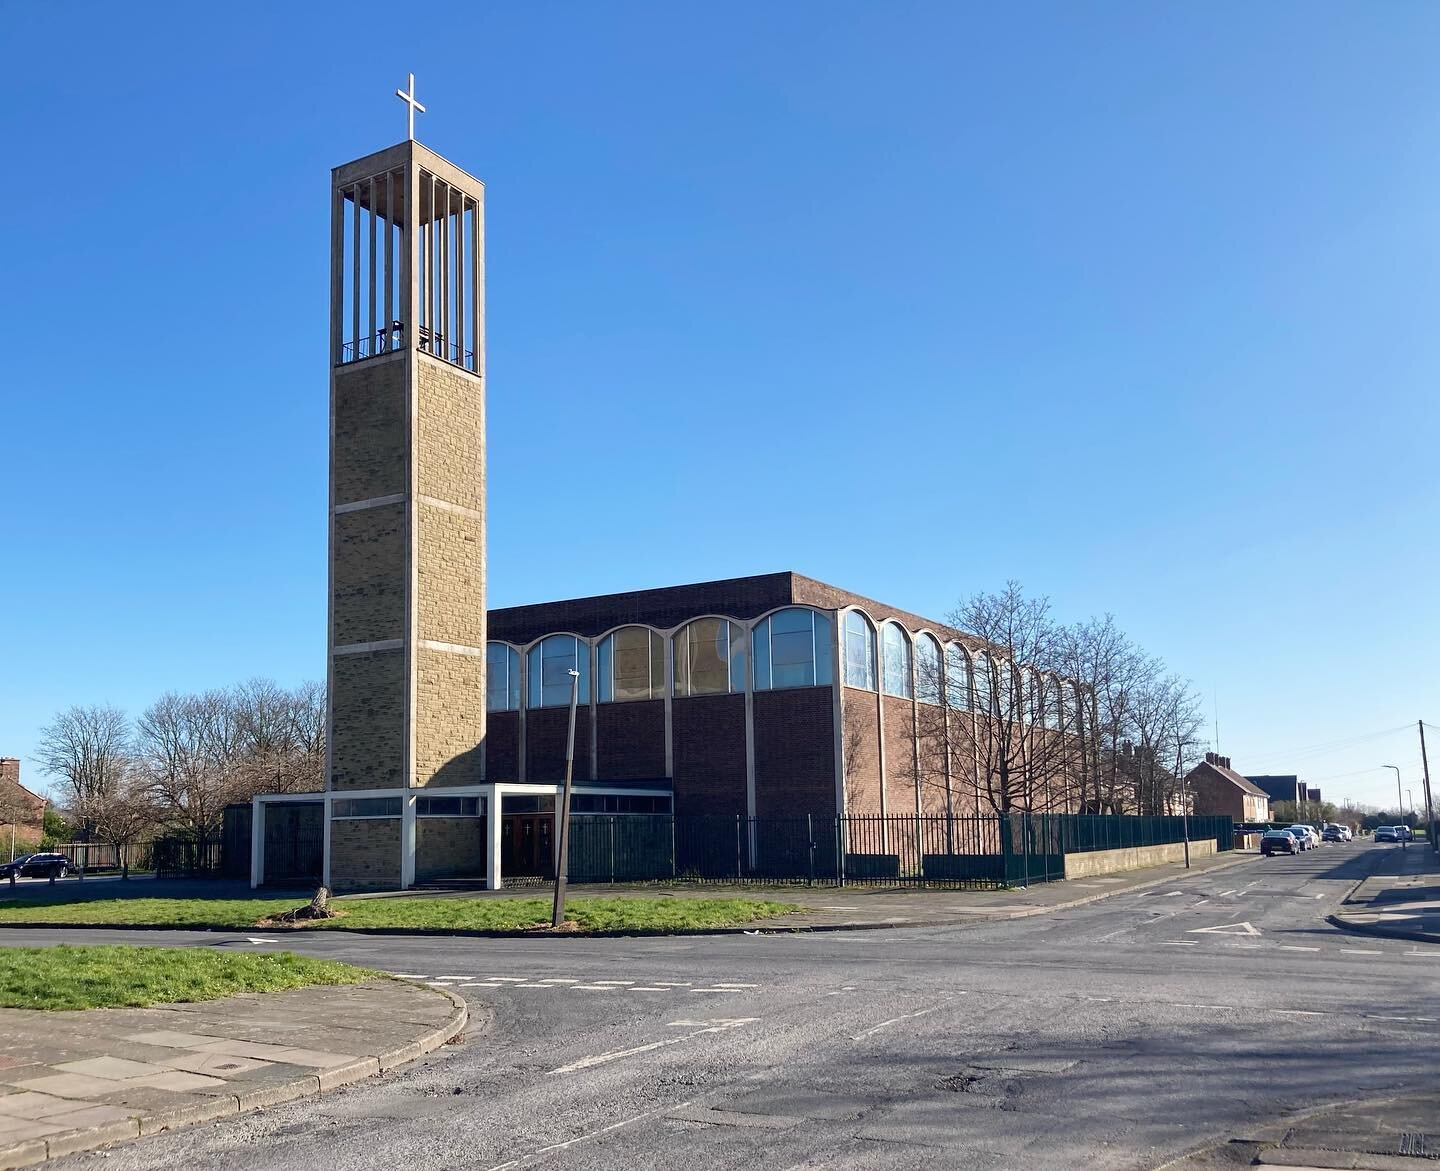 St Ambrose RC Church, Speke. Built between 1959 and 1961, it was designed by Alfred Bullen of Weightman and Bullen, with assistance from Jerzy Faczyński.